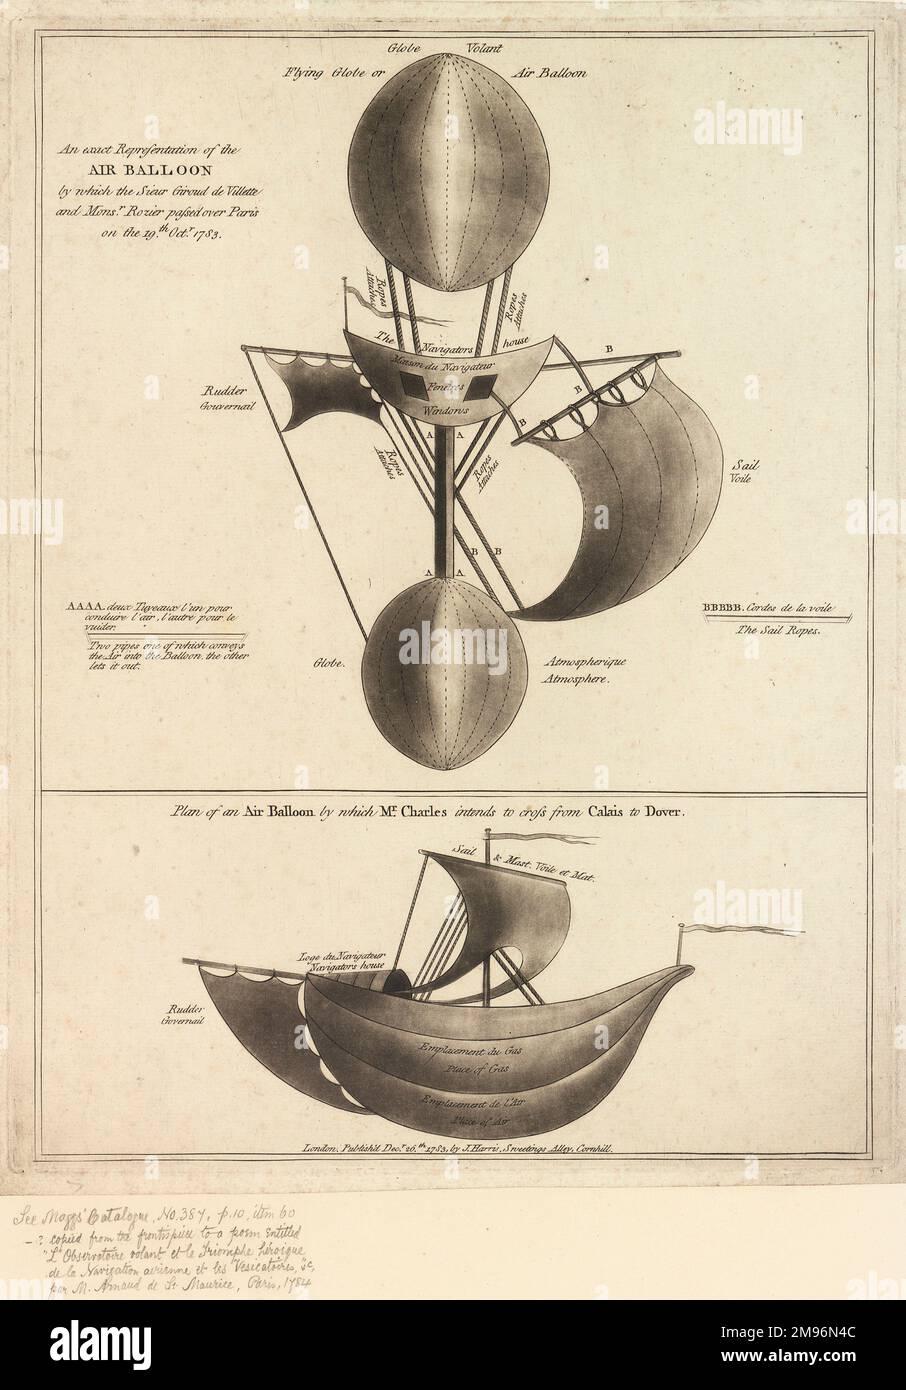 Two fanciful technical drawings.  Above is a Globe Volant (Flying Globe) in which Giroud de Villette and M Rozier passed over Paris on 19 October 1783.  Below is an Air Balloon in which Mr Charles intends to cross from Calais to Dover. Stock Photo